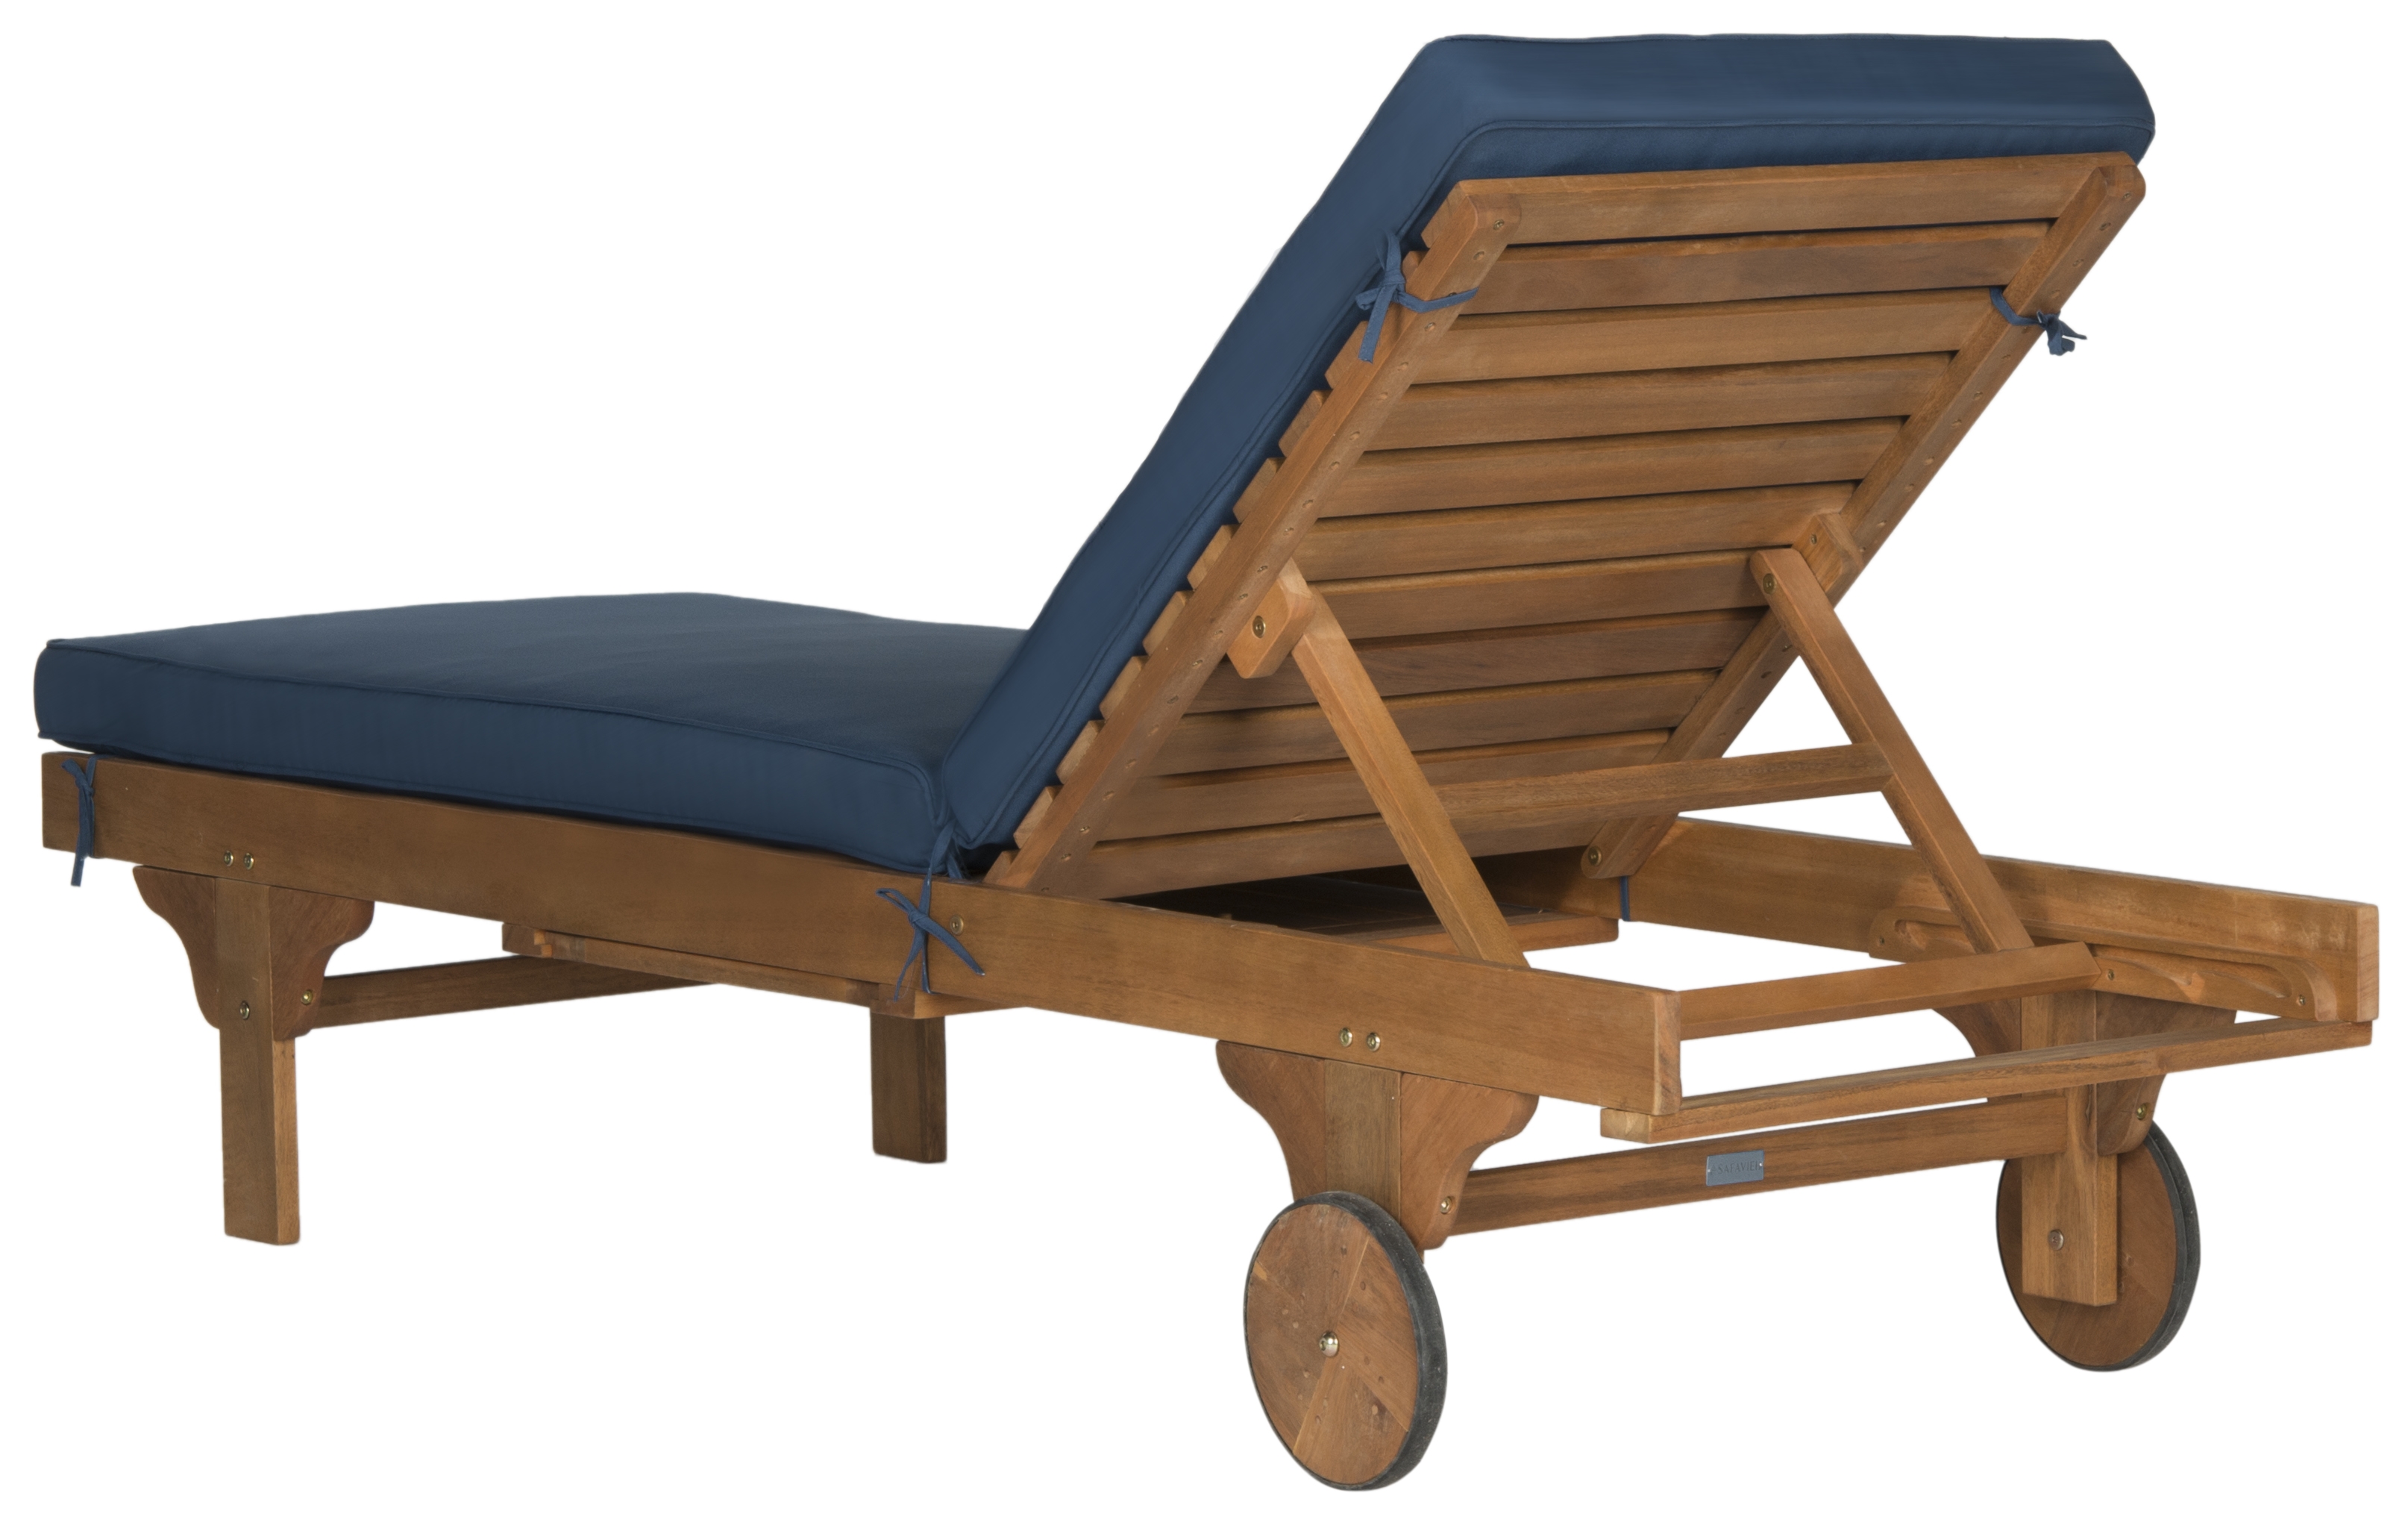 Newport Chaise Lounge Chair With Side Table - Natural/Navy - Arlo Home - Image 2